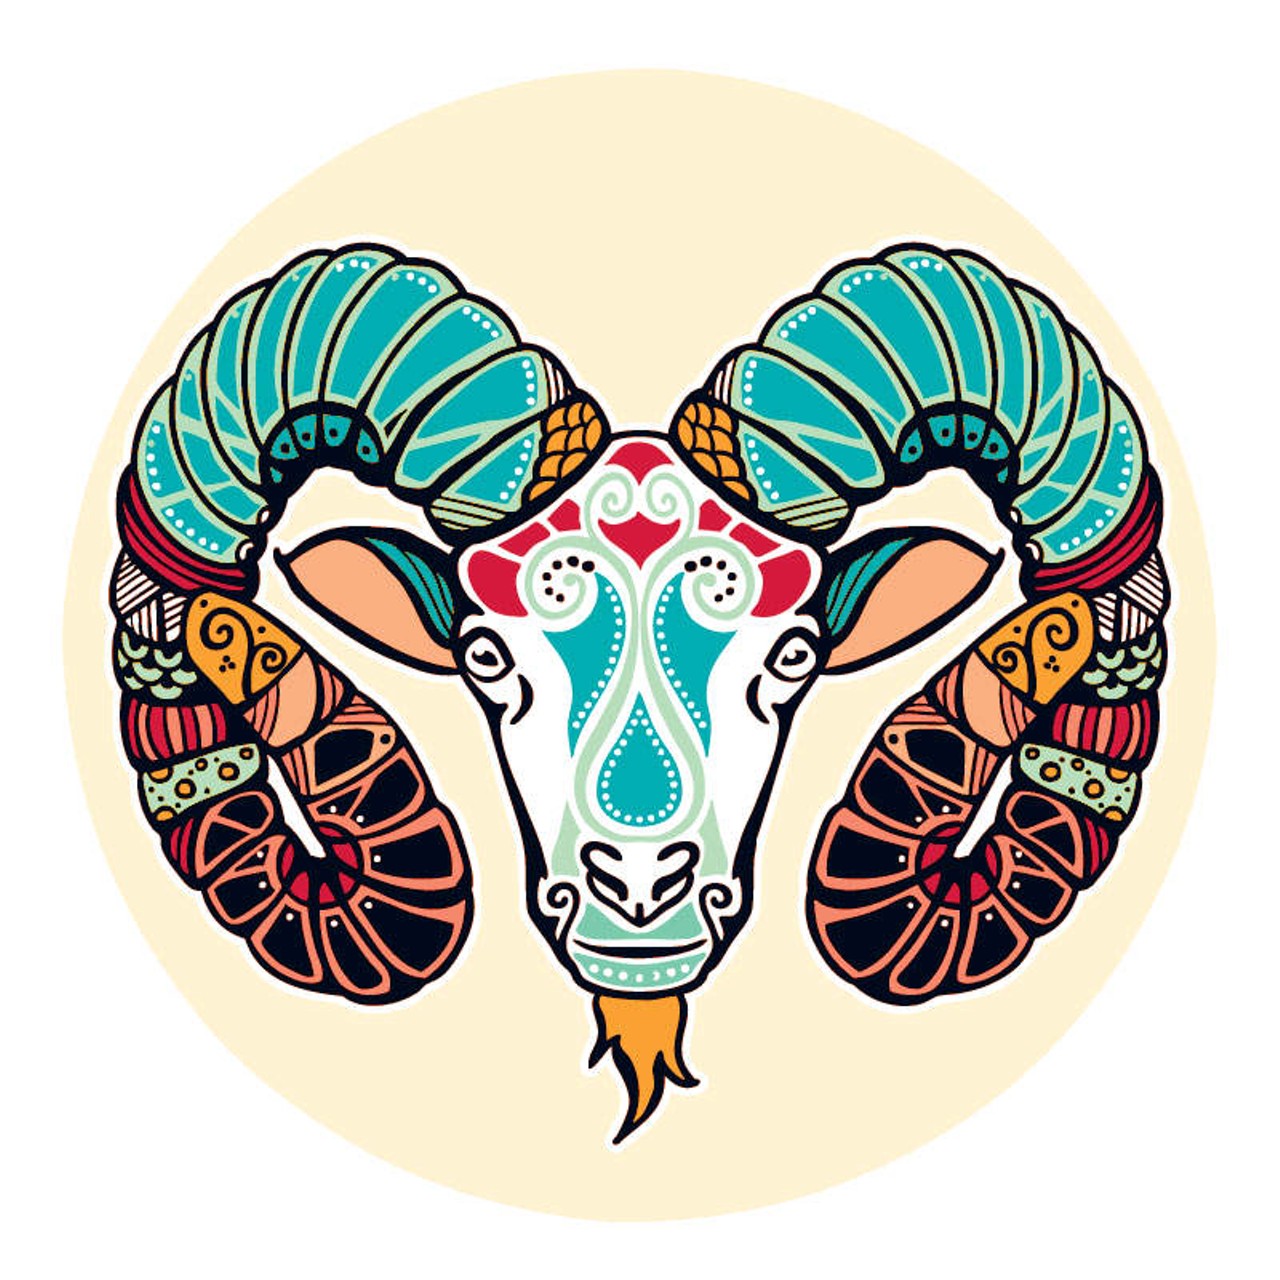 ARIES (March 21- April 20): 
The way things show up in the nick of time, you&#146;d think the angels had something to do with this. Just when you were getting ready to bail, in the midst of the craziest scenario you&#146;ve seen so far, you&#146;re looking at the other side of the worst of it. For the next few weeks do your best to hold steady and strengthen your position enough to prepare for the next go-round. This means getting back to a place of physical and emotional balance. Don&#146;t waste your time or your energy making room for anything that isn&#146;t there to support your need to restore your faith in what you&#146;re doing.